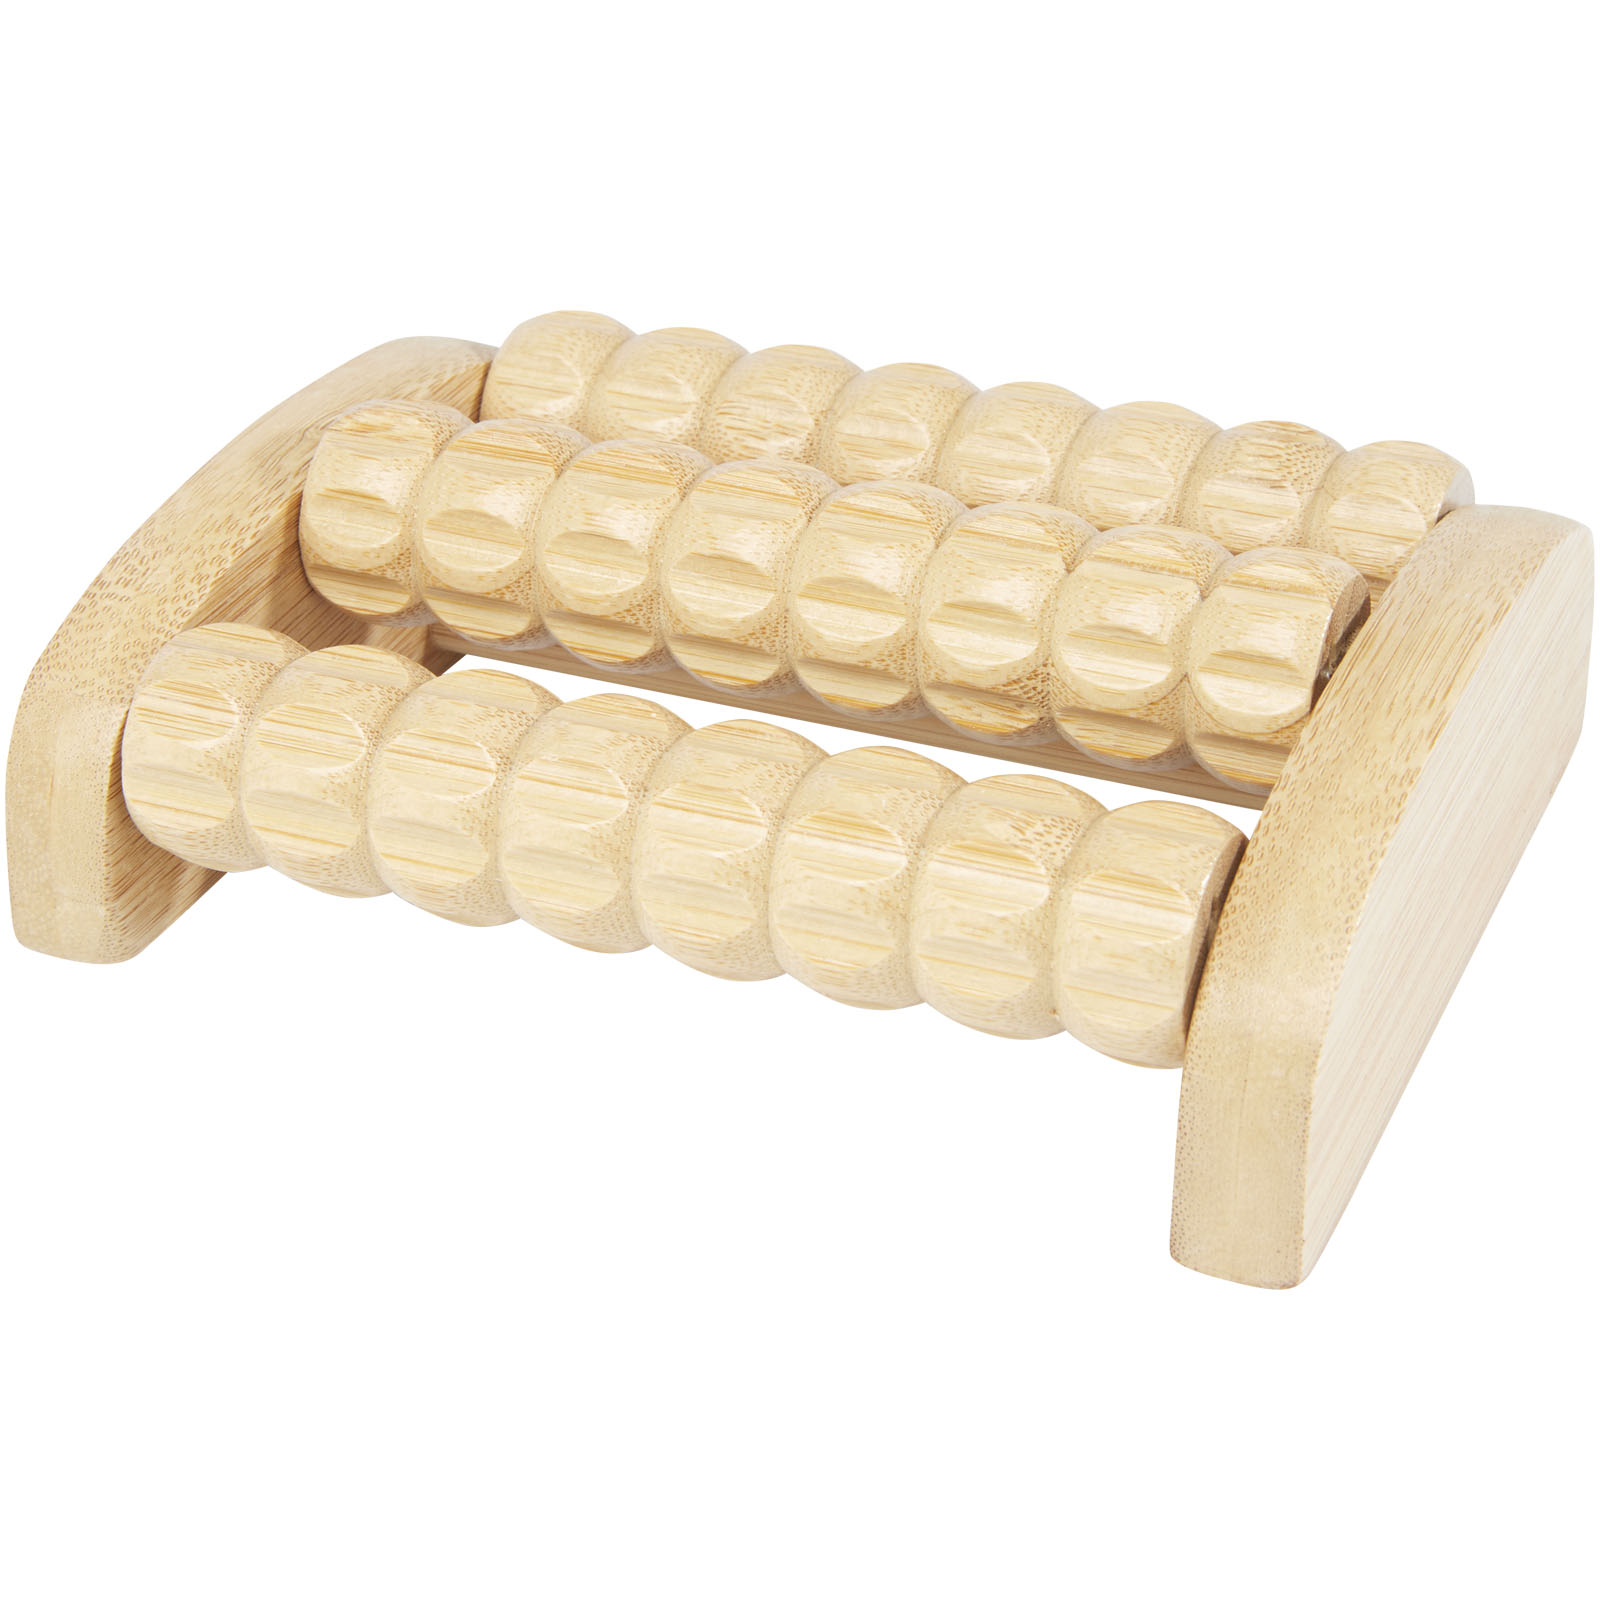 Advertising Personal Care - Venis bamboo foot massager - 0